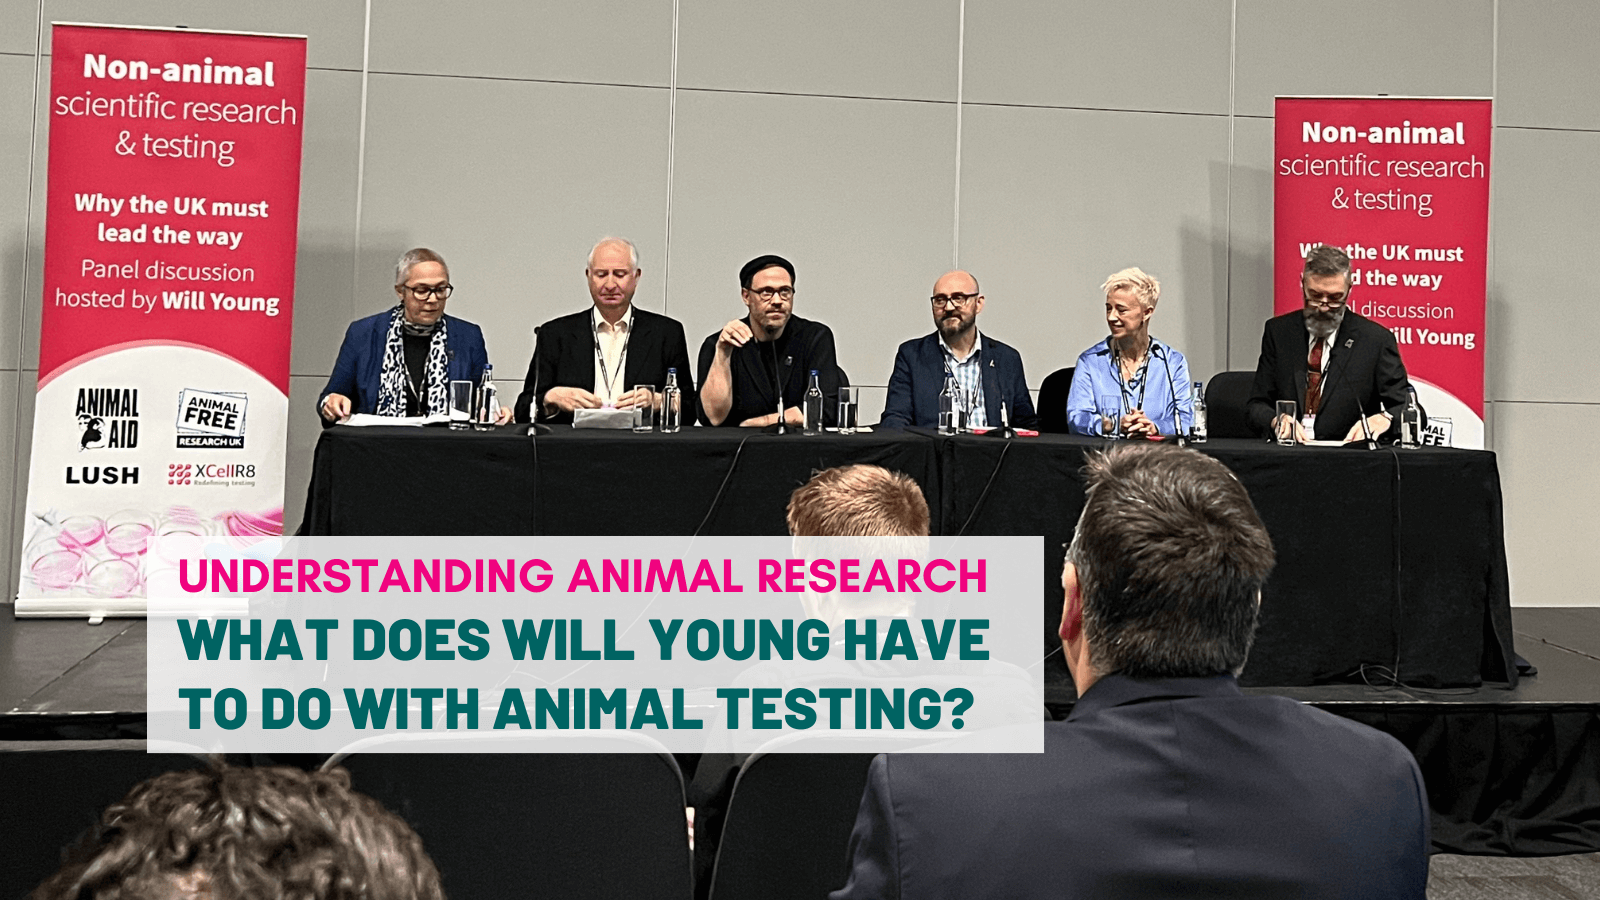 What does Will Young have to do with animal testing?